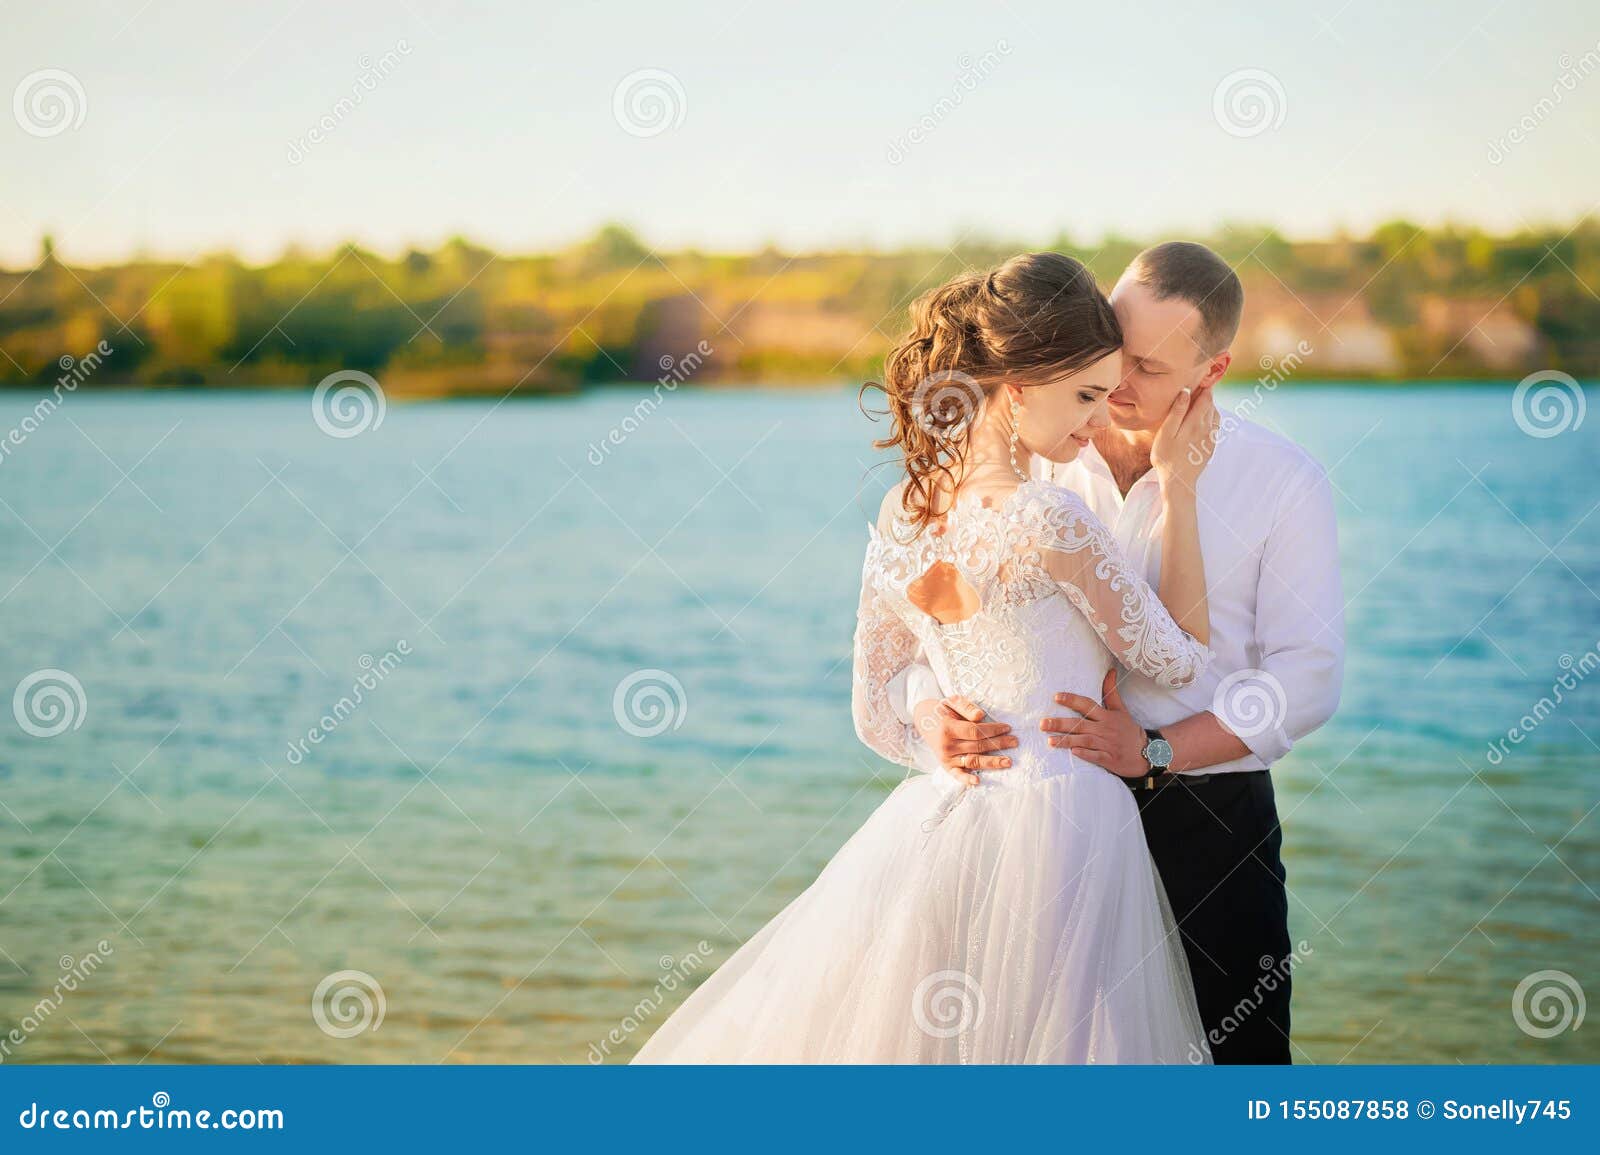 Romantic Wedding Couple on the Shore. Bride with the Groom in the ...